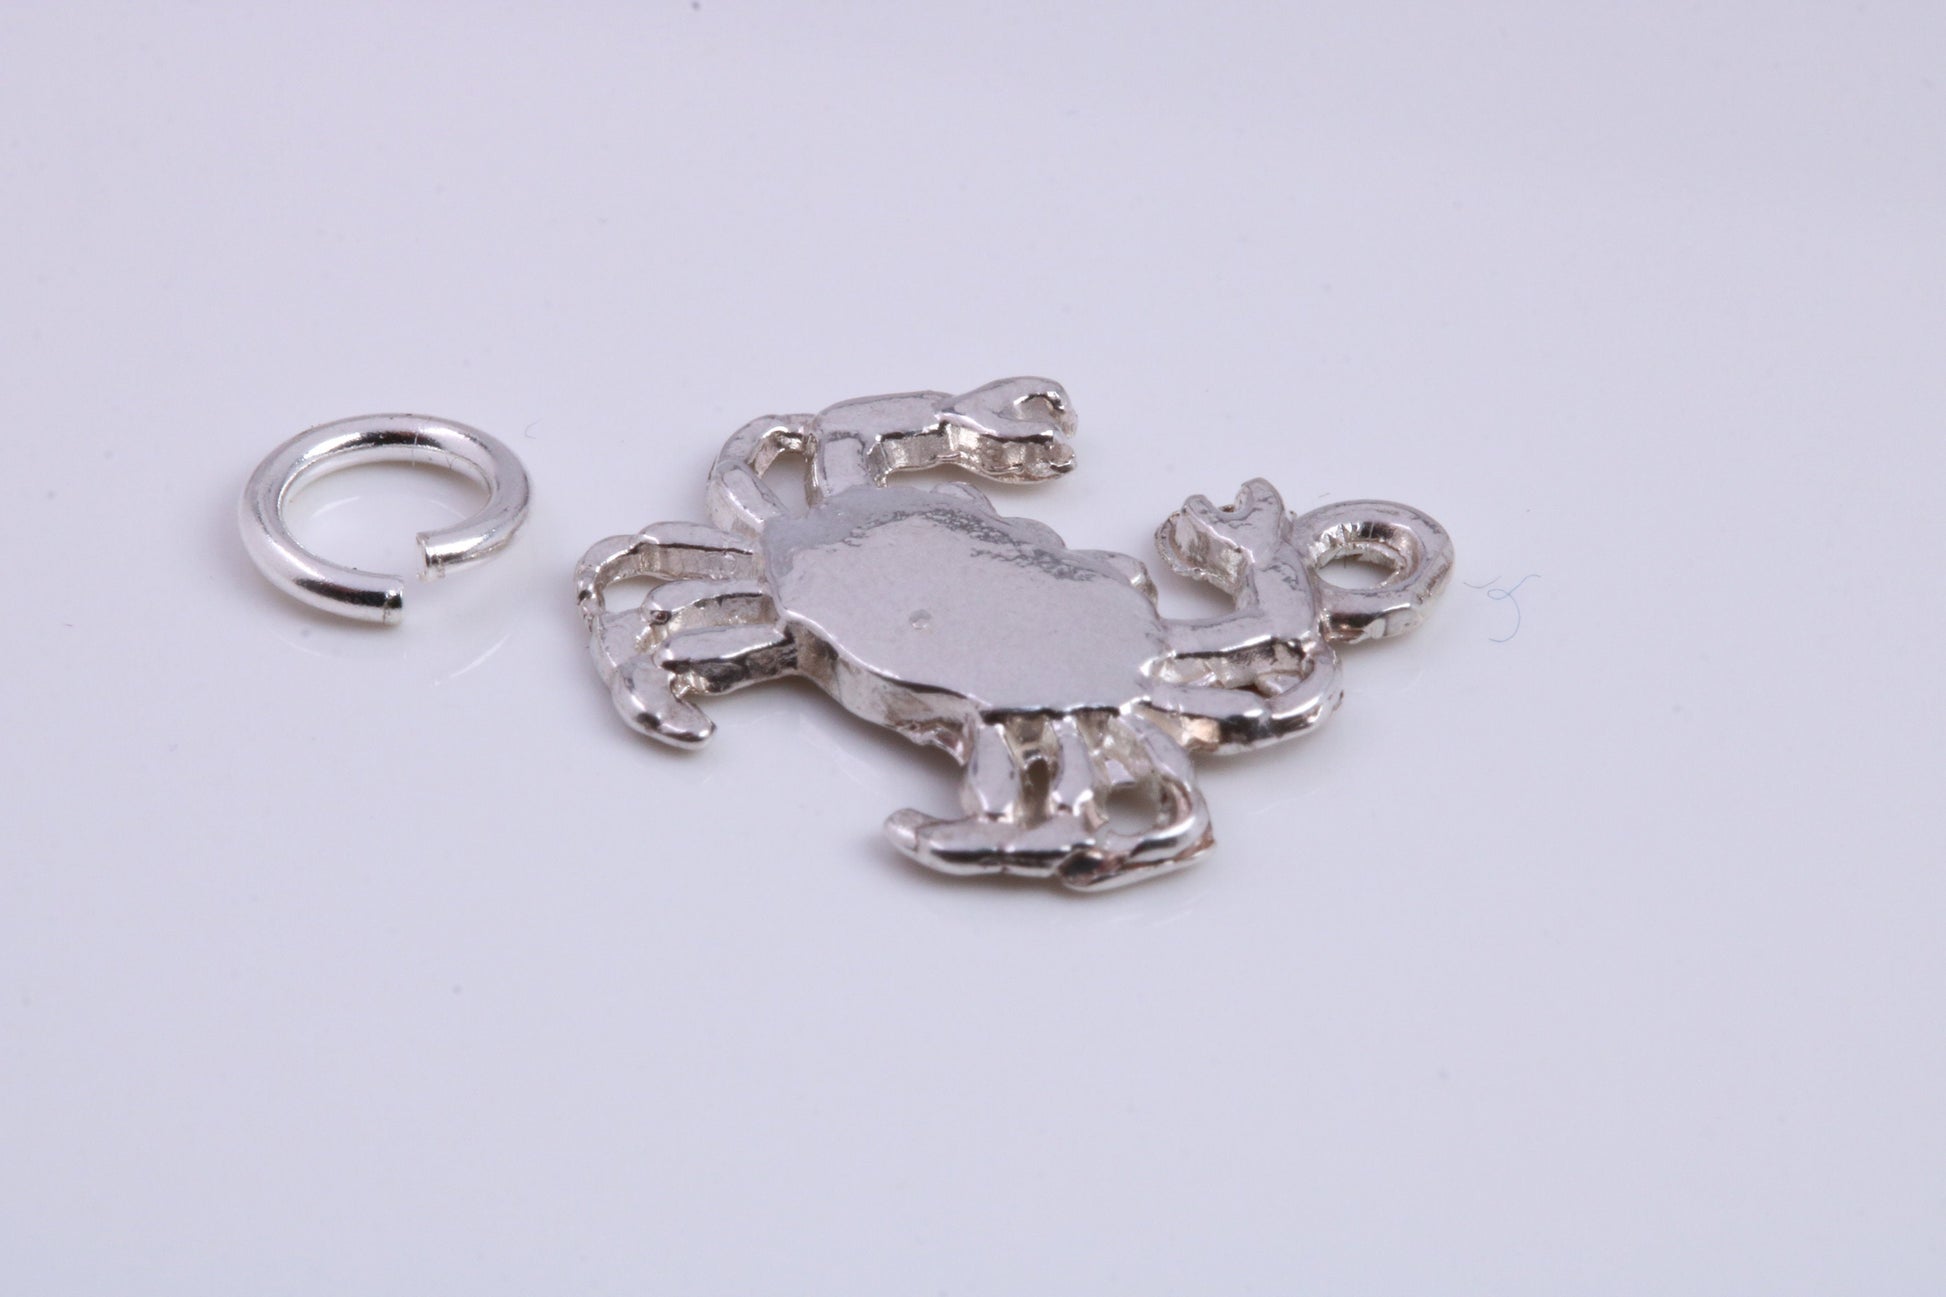 Crab Charm, Traditional Charm, Made from Solid 925 Grade Sterling Silver, Complete with Attachment Link